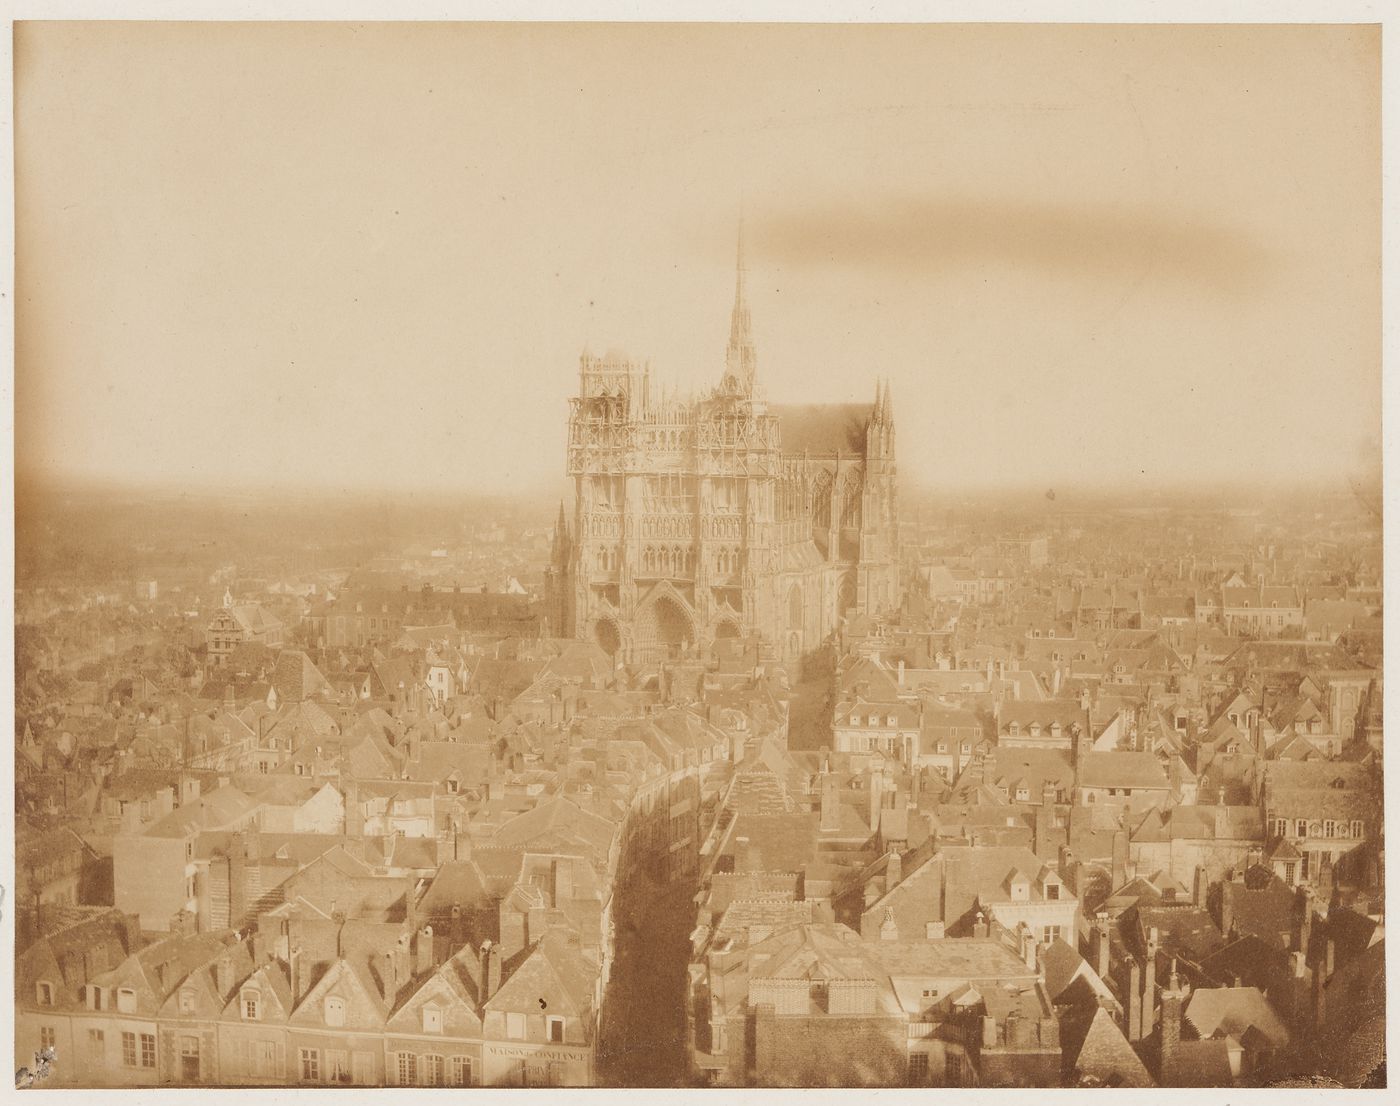 General view from an elevated view point, showing Amiens town and cathedral, including restoration project on west façade, Amiens, France